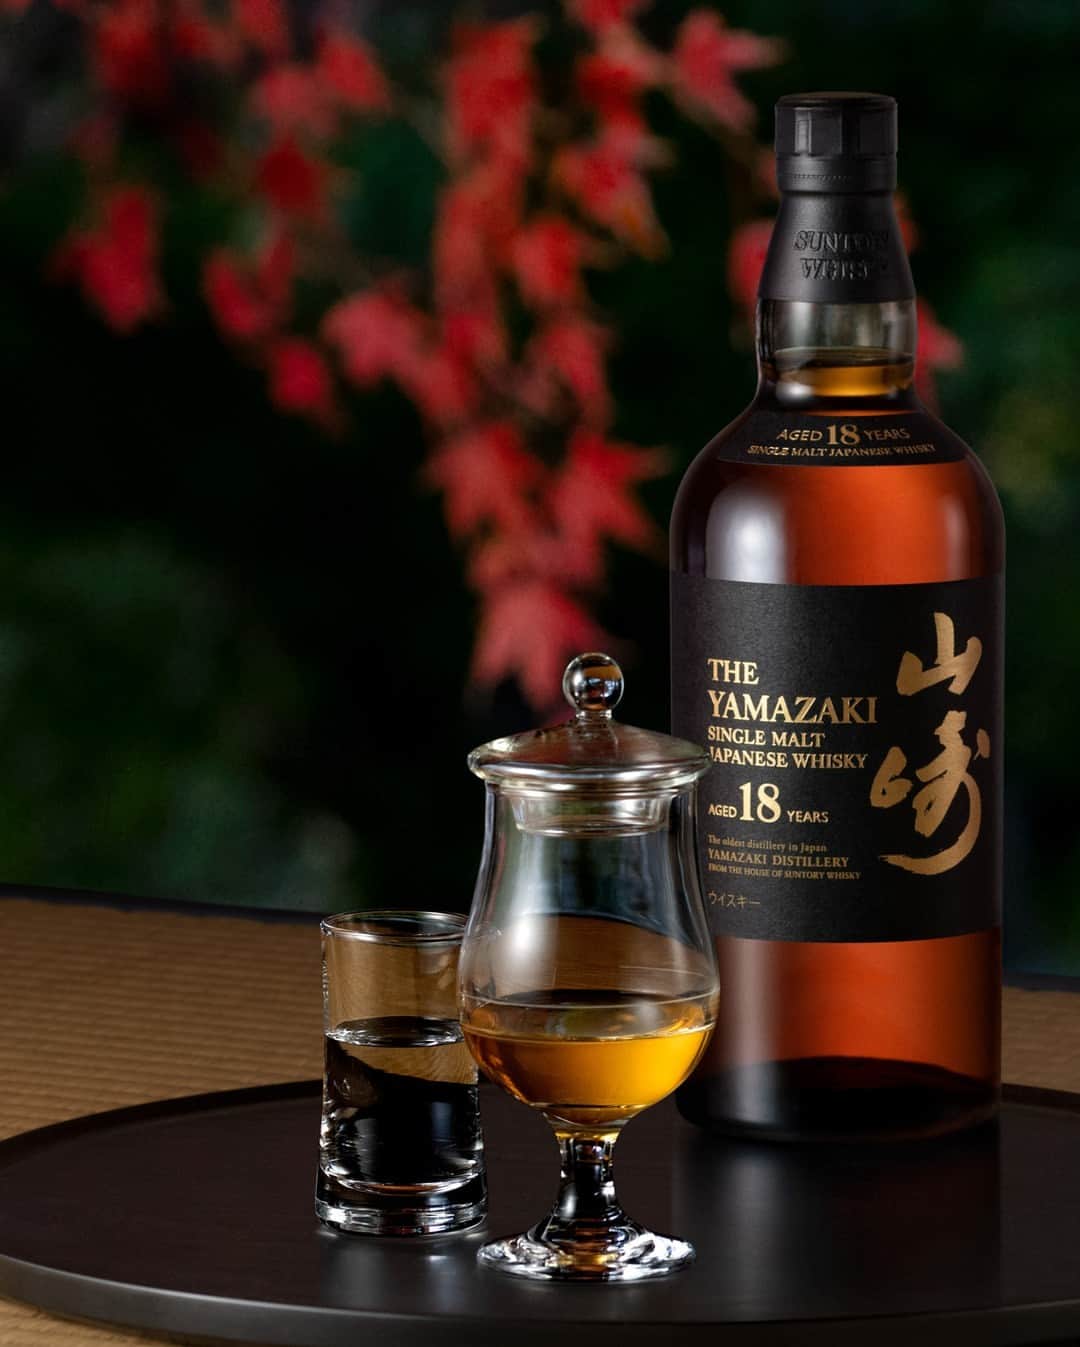 Suntory Whiskyのインスタグラム：「Bask in the fading light of golden hour amongst the red-gold hues of fall with the House of Suntory's Yamazaki 18. Enjoy it neat to savor its rich palate of blackberry, strawberry jam and dark chocolate.⁣ ⁣ #SuntoryTime #HouseofSuntory #SuntoryWhisky #JapaneseWhisky #Whisky #Yamazaki #Whiskygram #Drinkstagram」